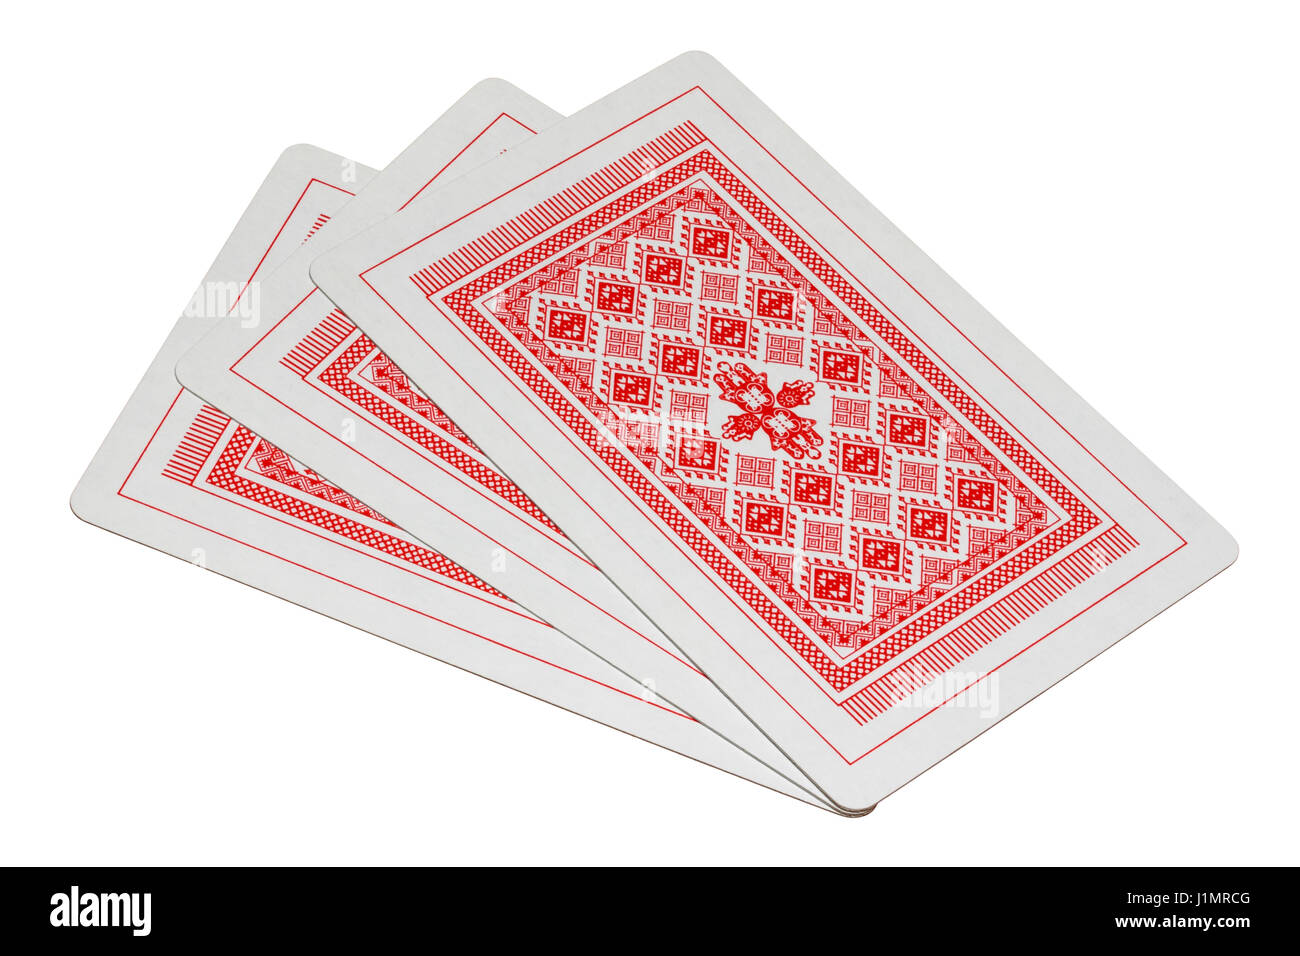 Fan of three playing cards face down back isolated on a white background Stock Photo